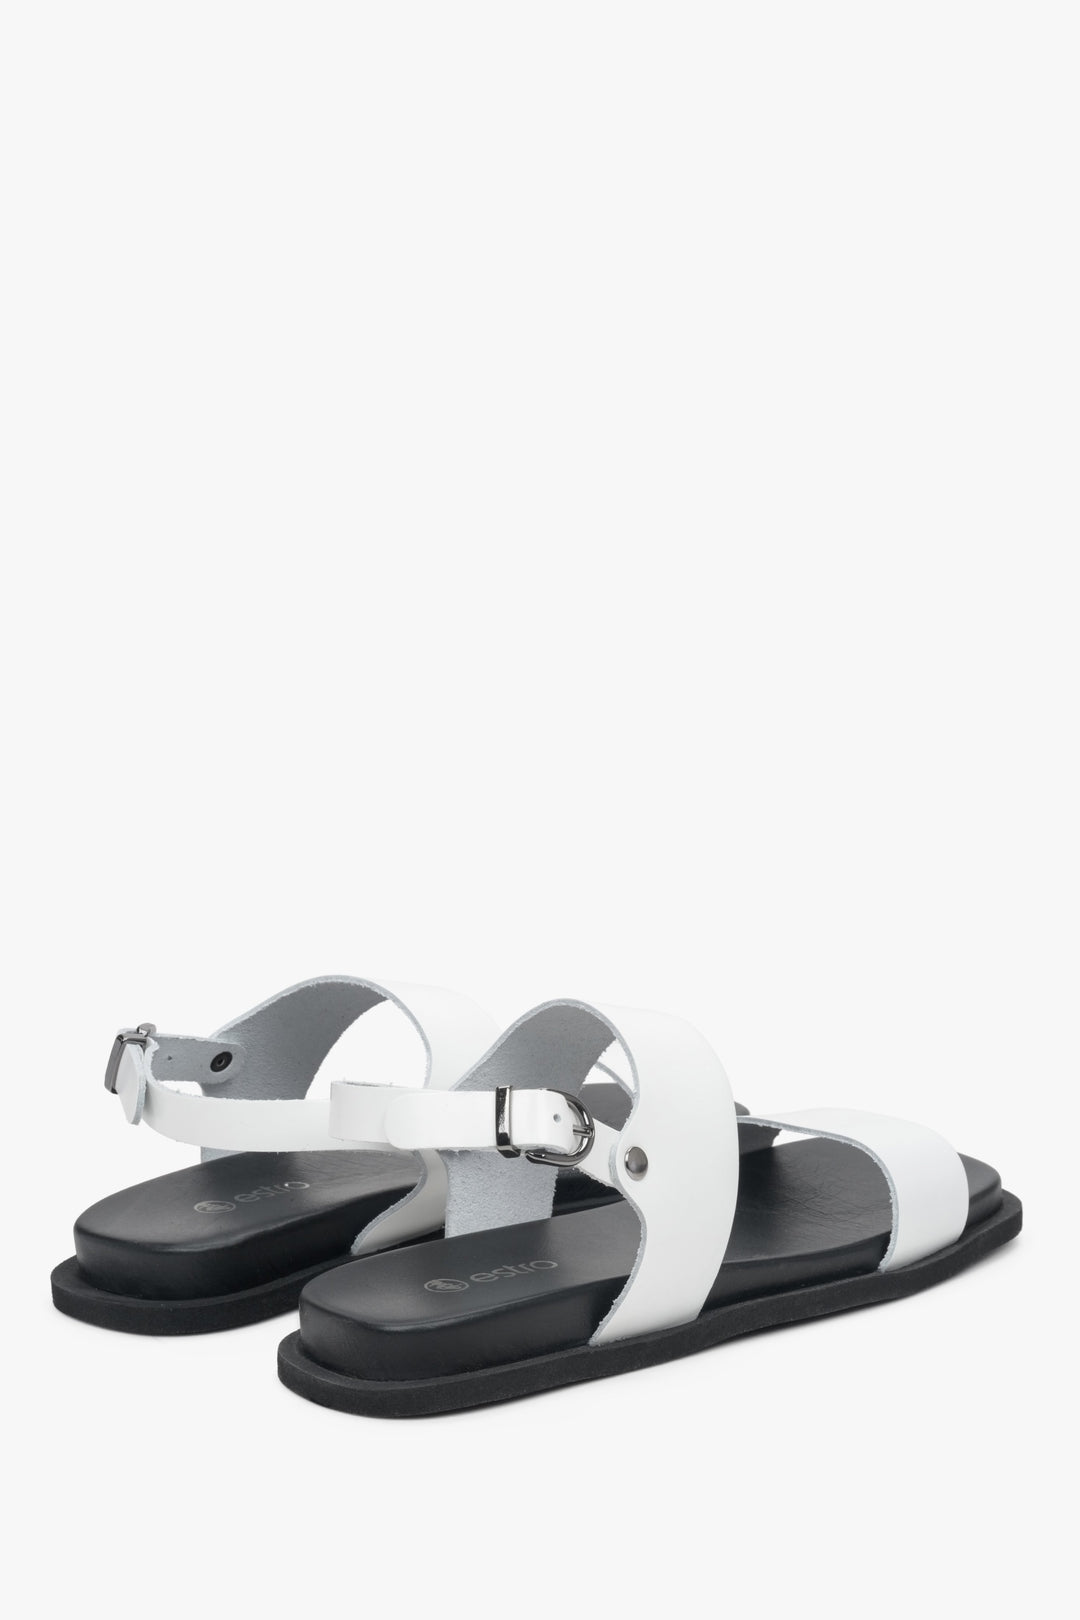 Estro leather women's flat heel sandals with a buckle  - presentation of the back of the shoes in white.